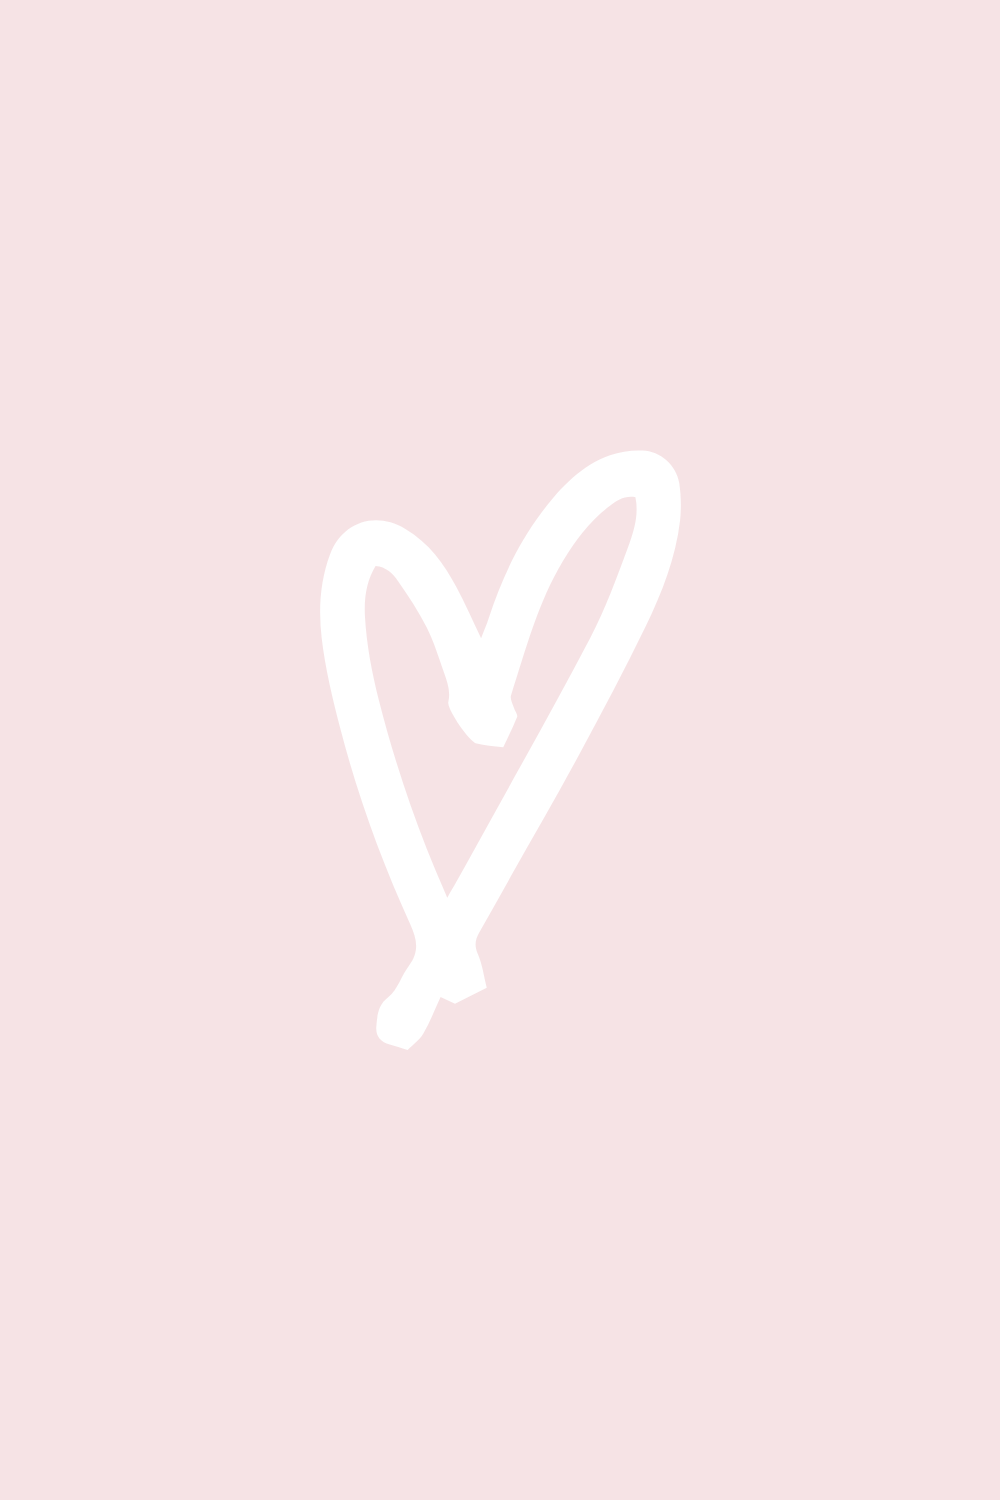 A pastel pink background with a white heart in the center. The heart is drawn with a rough, brush-like texture. - Blush